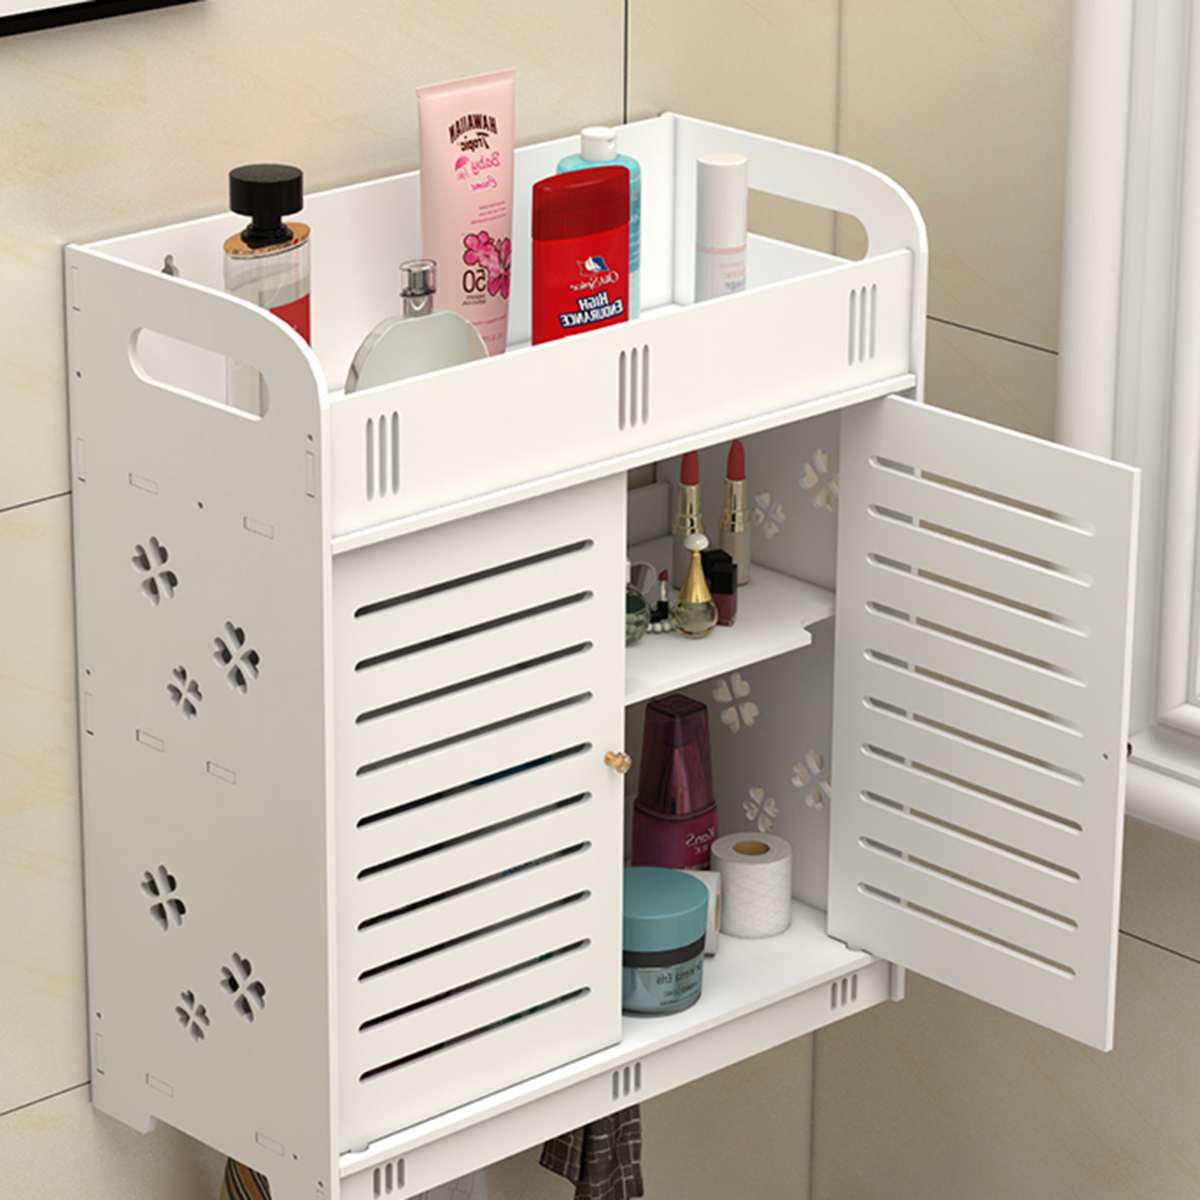 Wall Mounted PVC Bathroom [38] Storage Cabinet With Free Soap Dish By Miza